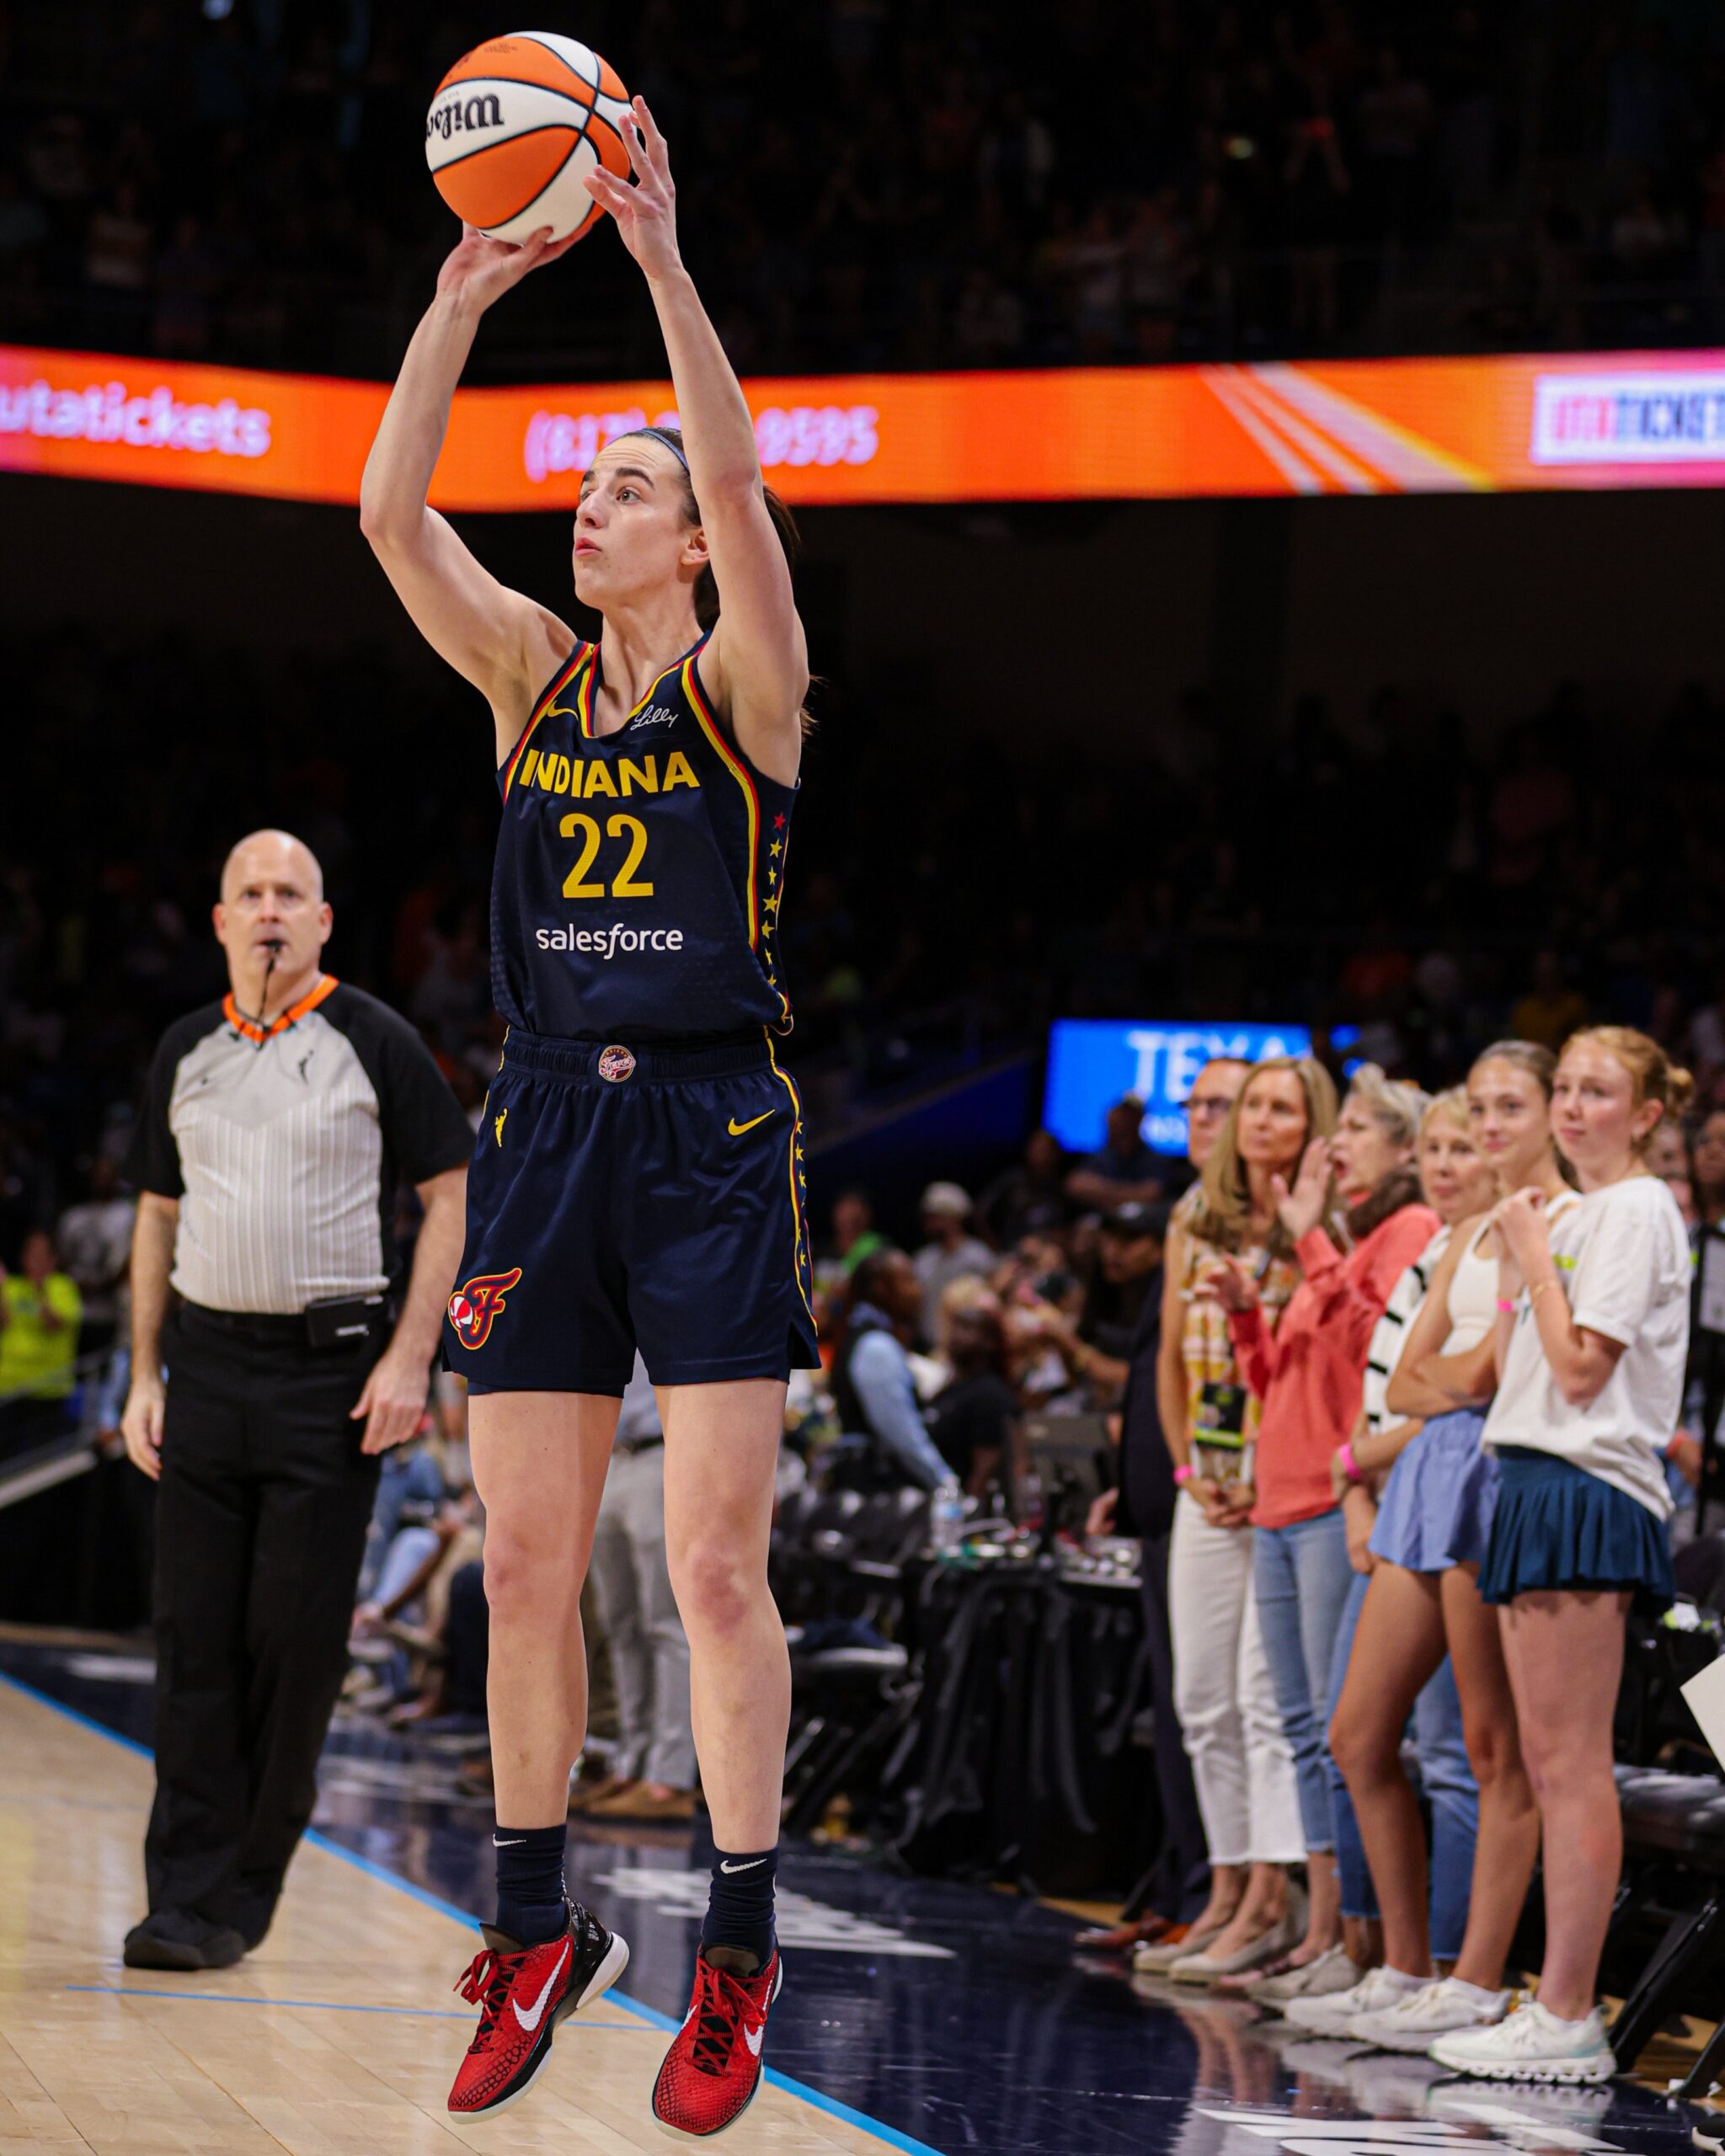 Caitlin Clark WNBA Debut is the Most Watched WNBA Game in 23 Years